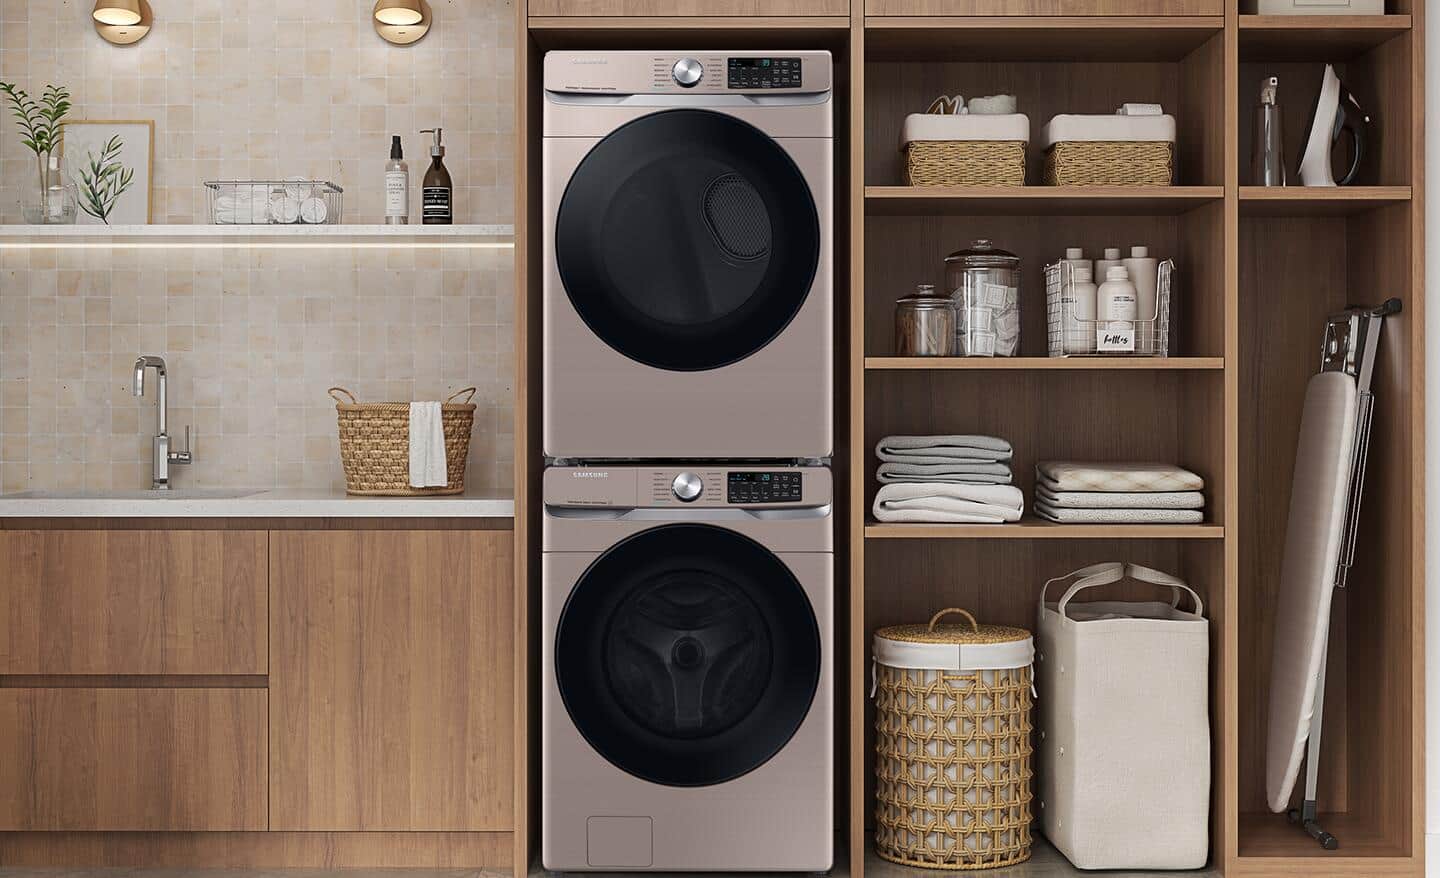 Top Load vs. Front Load Washer: Which Type Is Best?